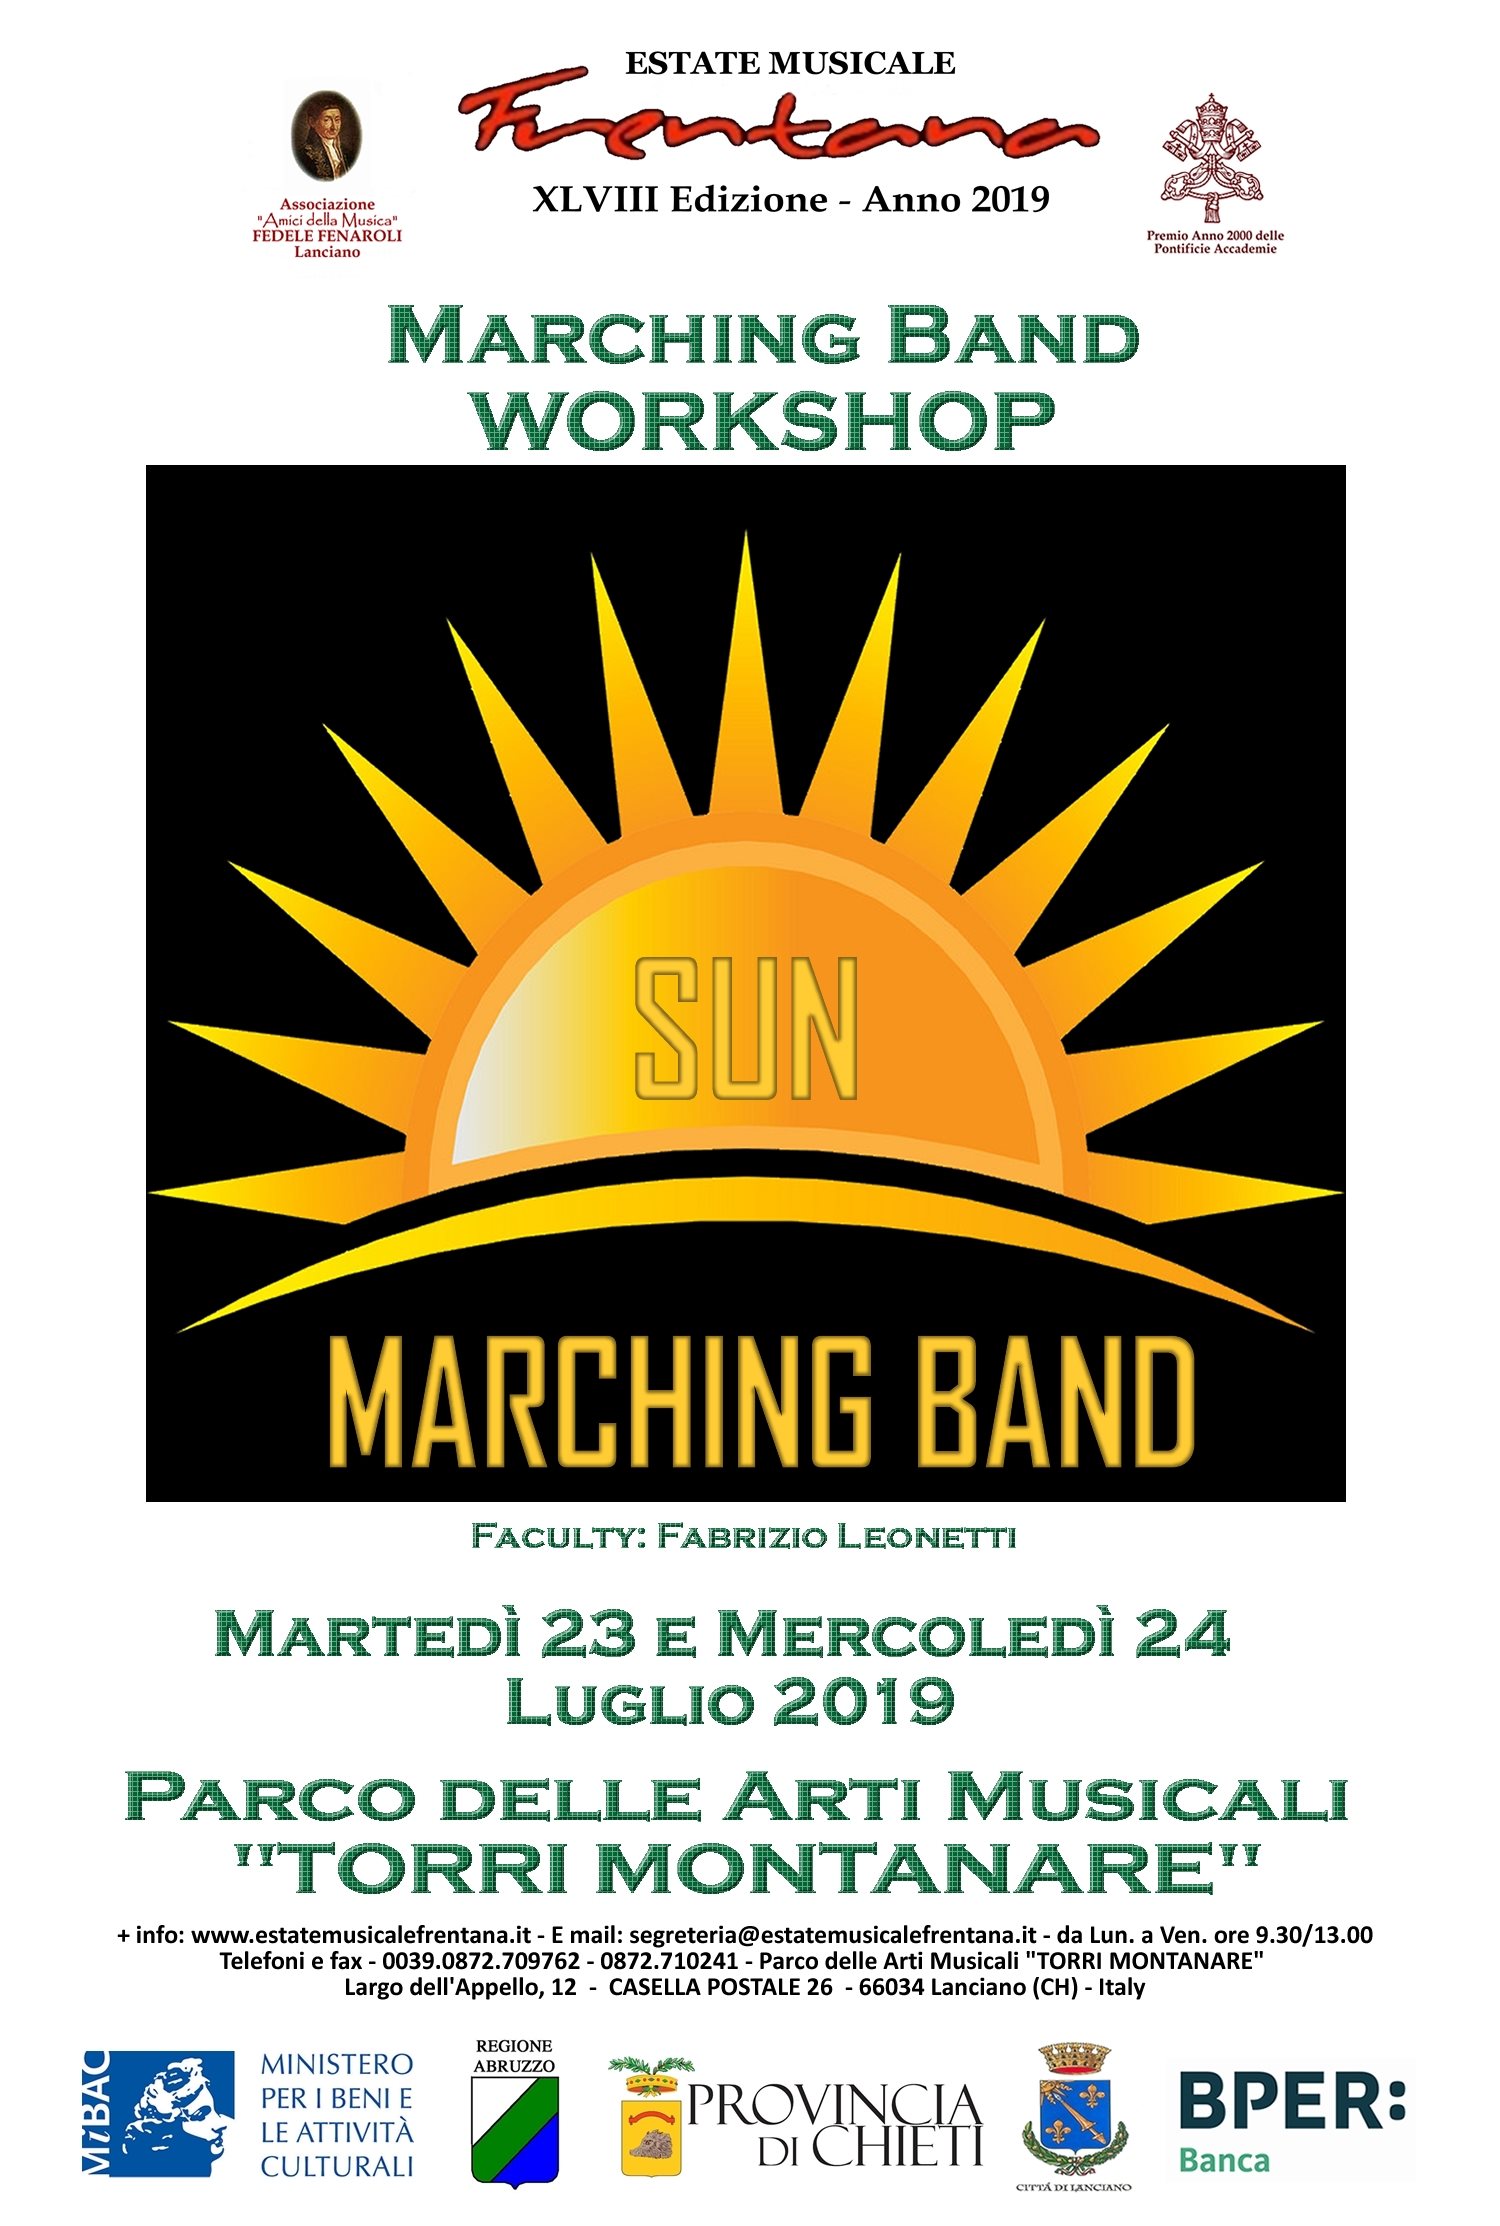 MARCHING BAND WORKSHOP